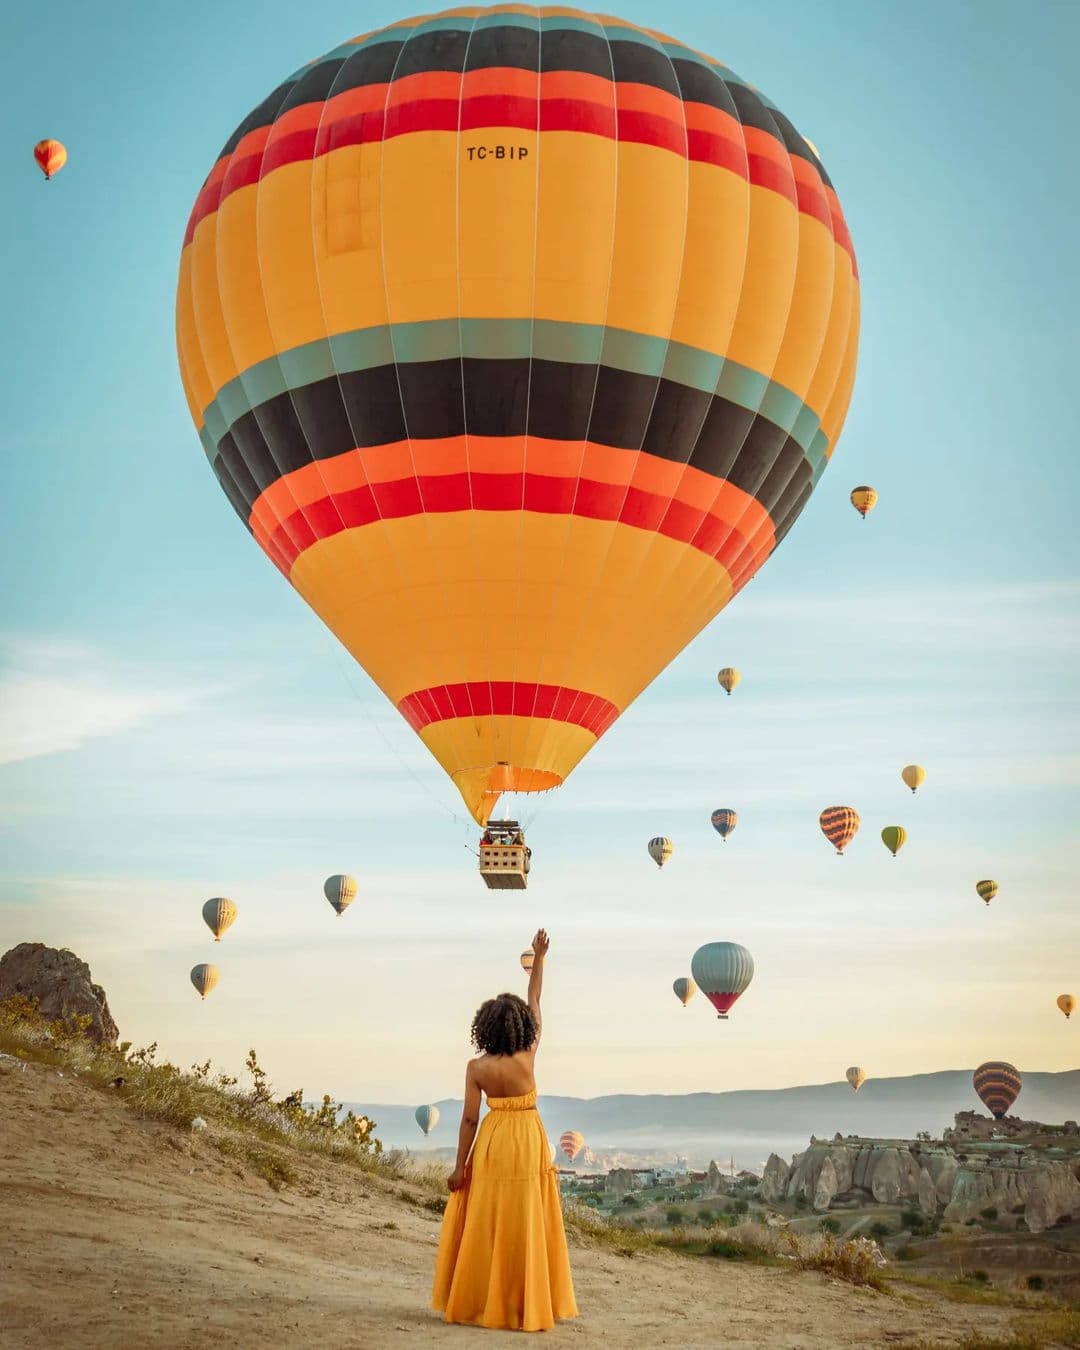 Frequently Asked Questions About Cappadocia Hot Air Balloon Rides